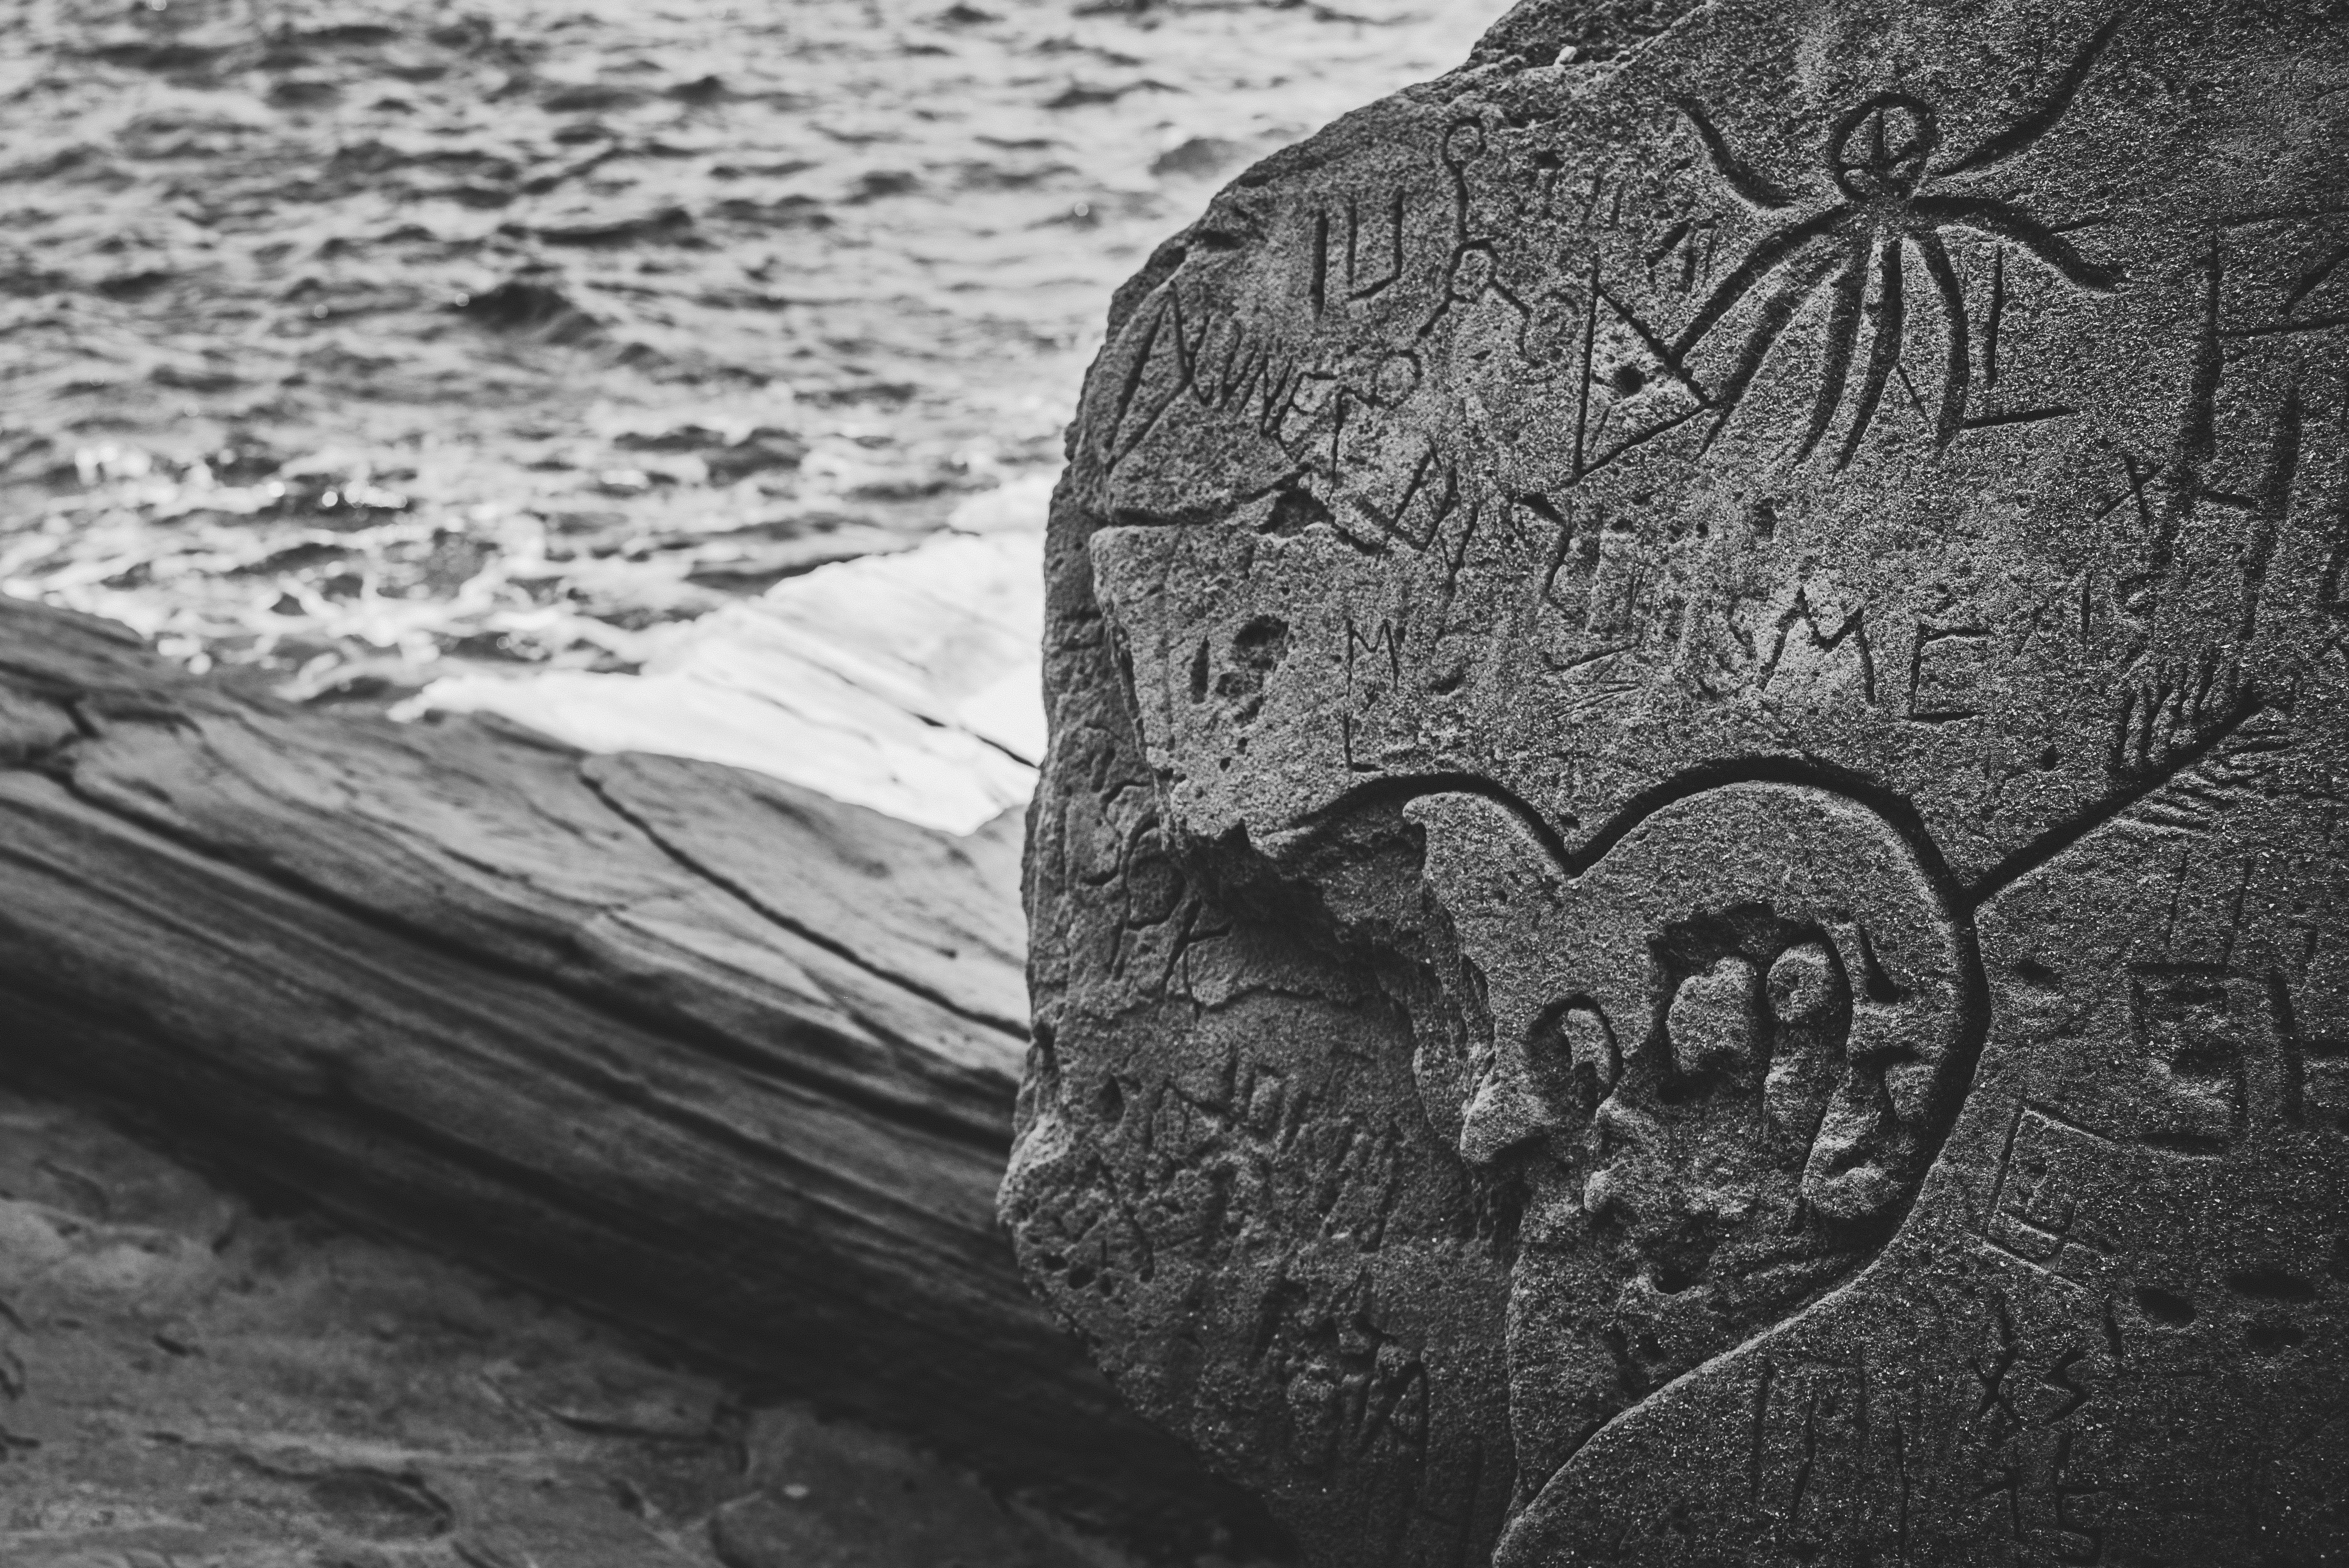 Black & white stone carvings on a rock by the sea